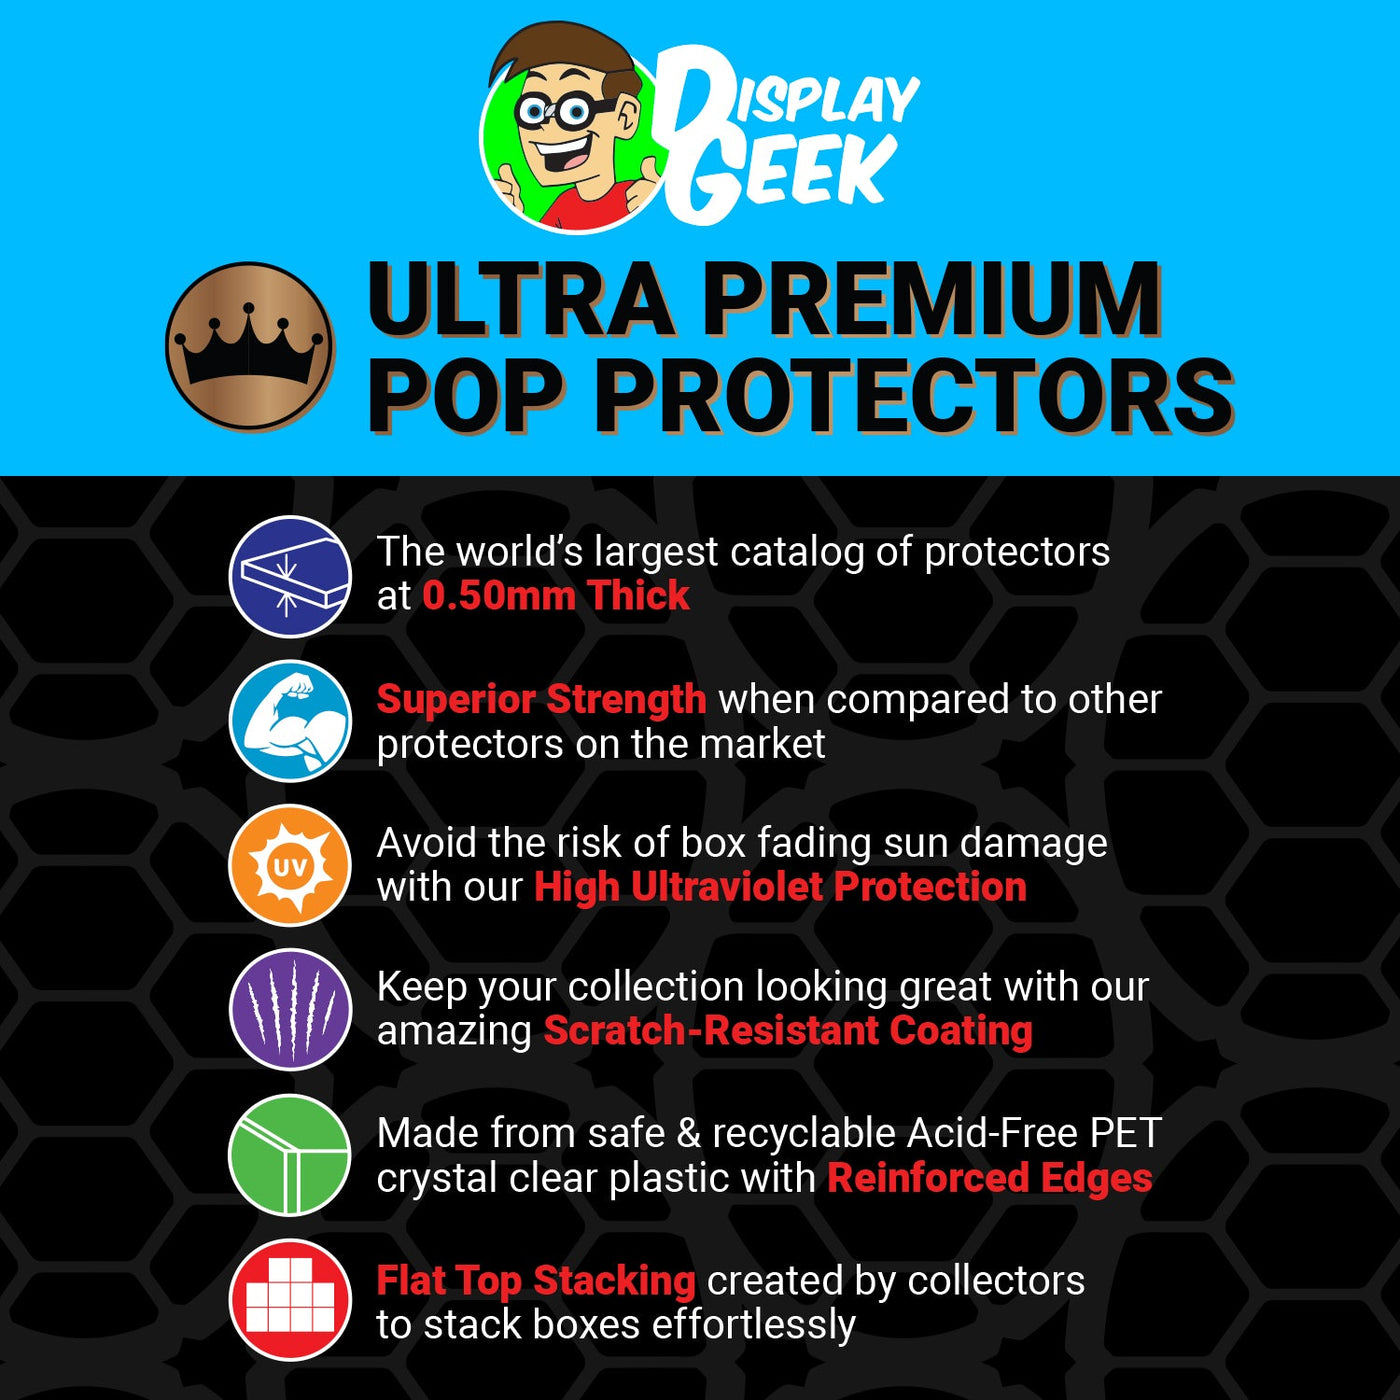 Pop Protector for Valkyrie's Flight Blacklight #86 Funko Pop Rides on The Protector Guide App by Display Geek